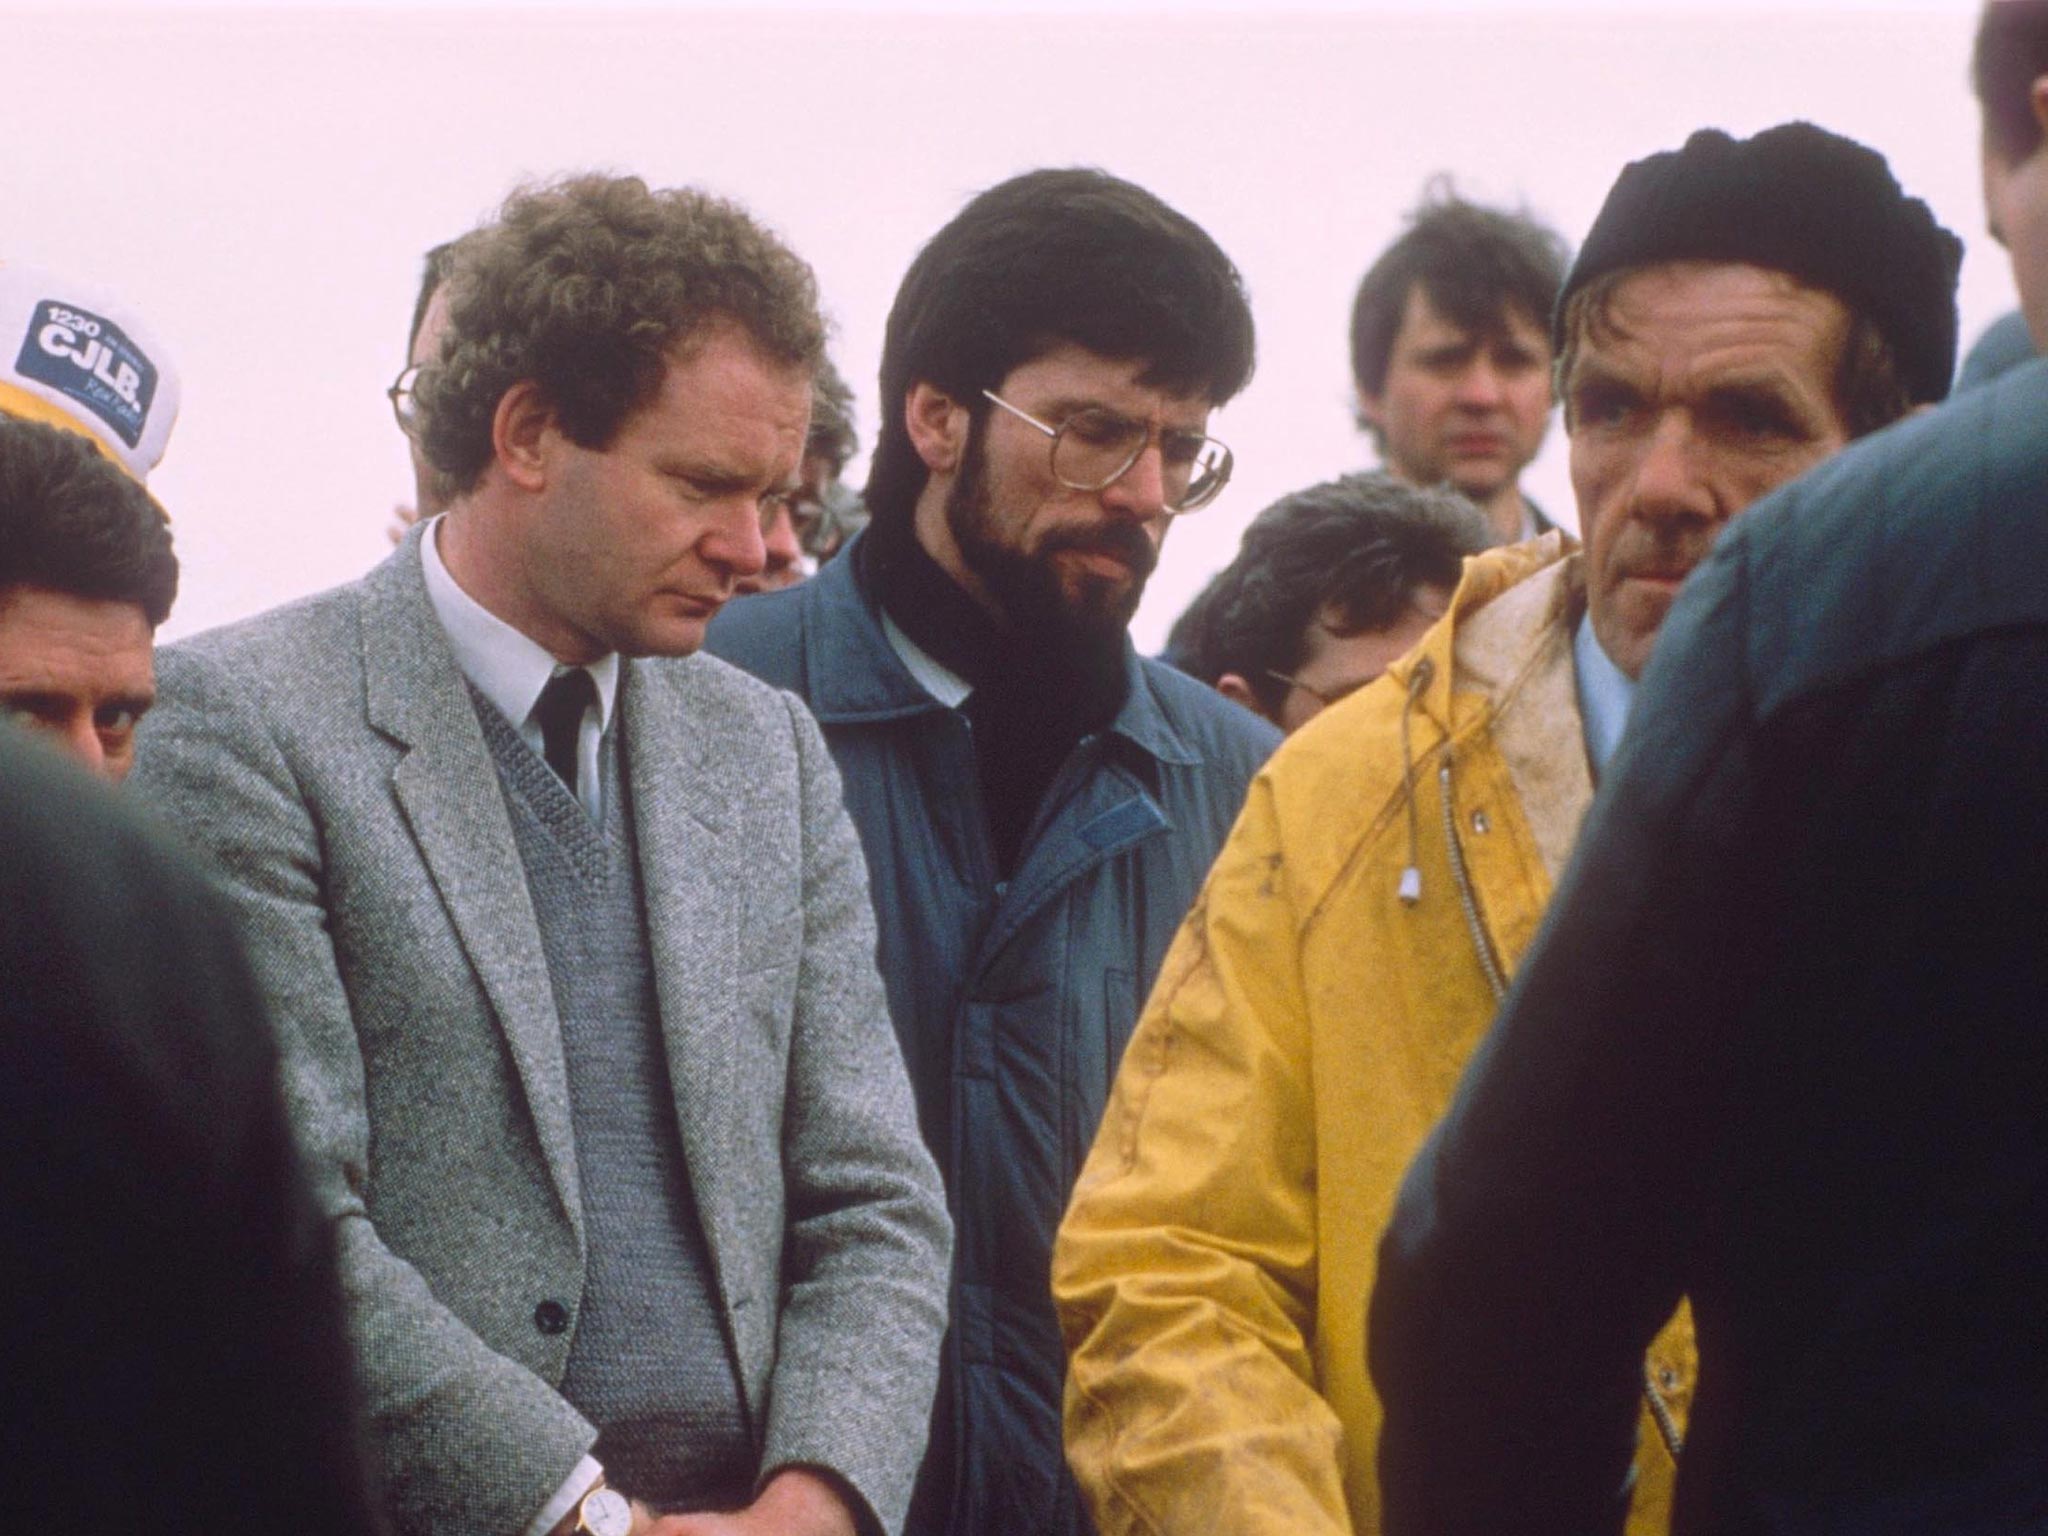 Conor Grimes ended up providing the voice of Gerry Adams (centre) for six years